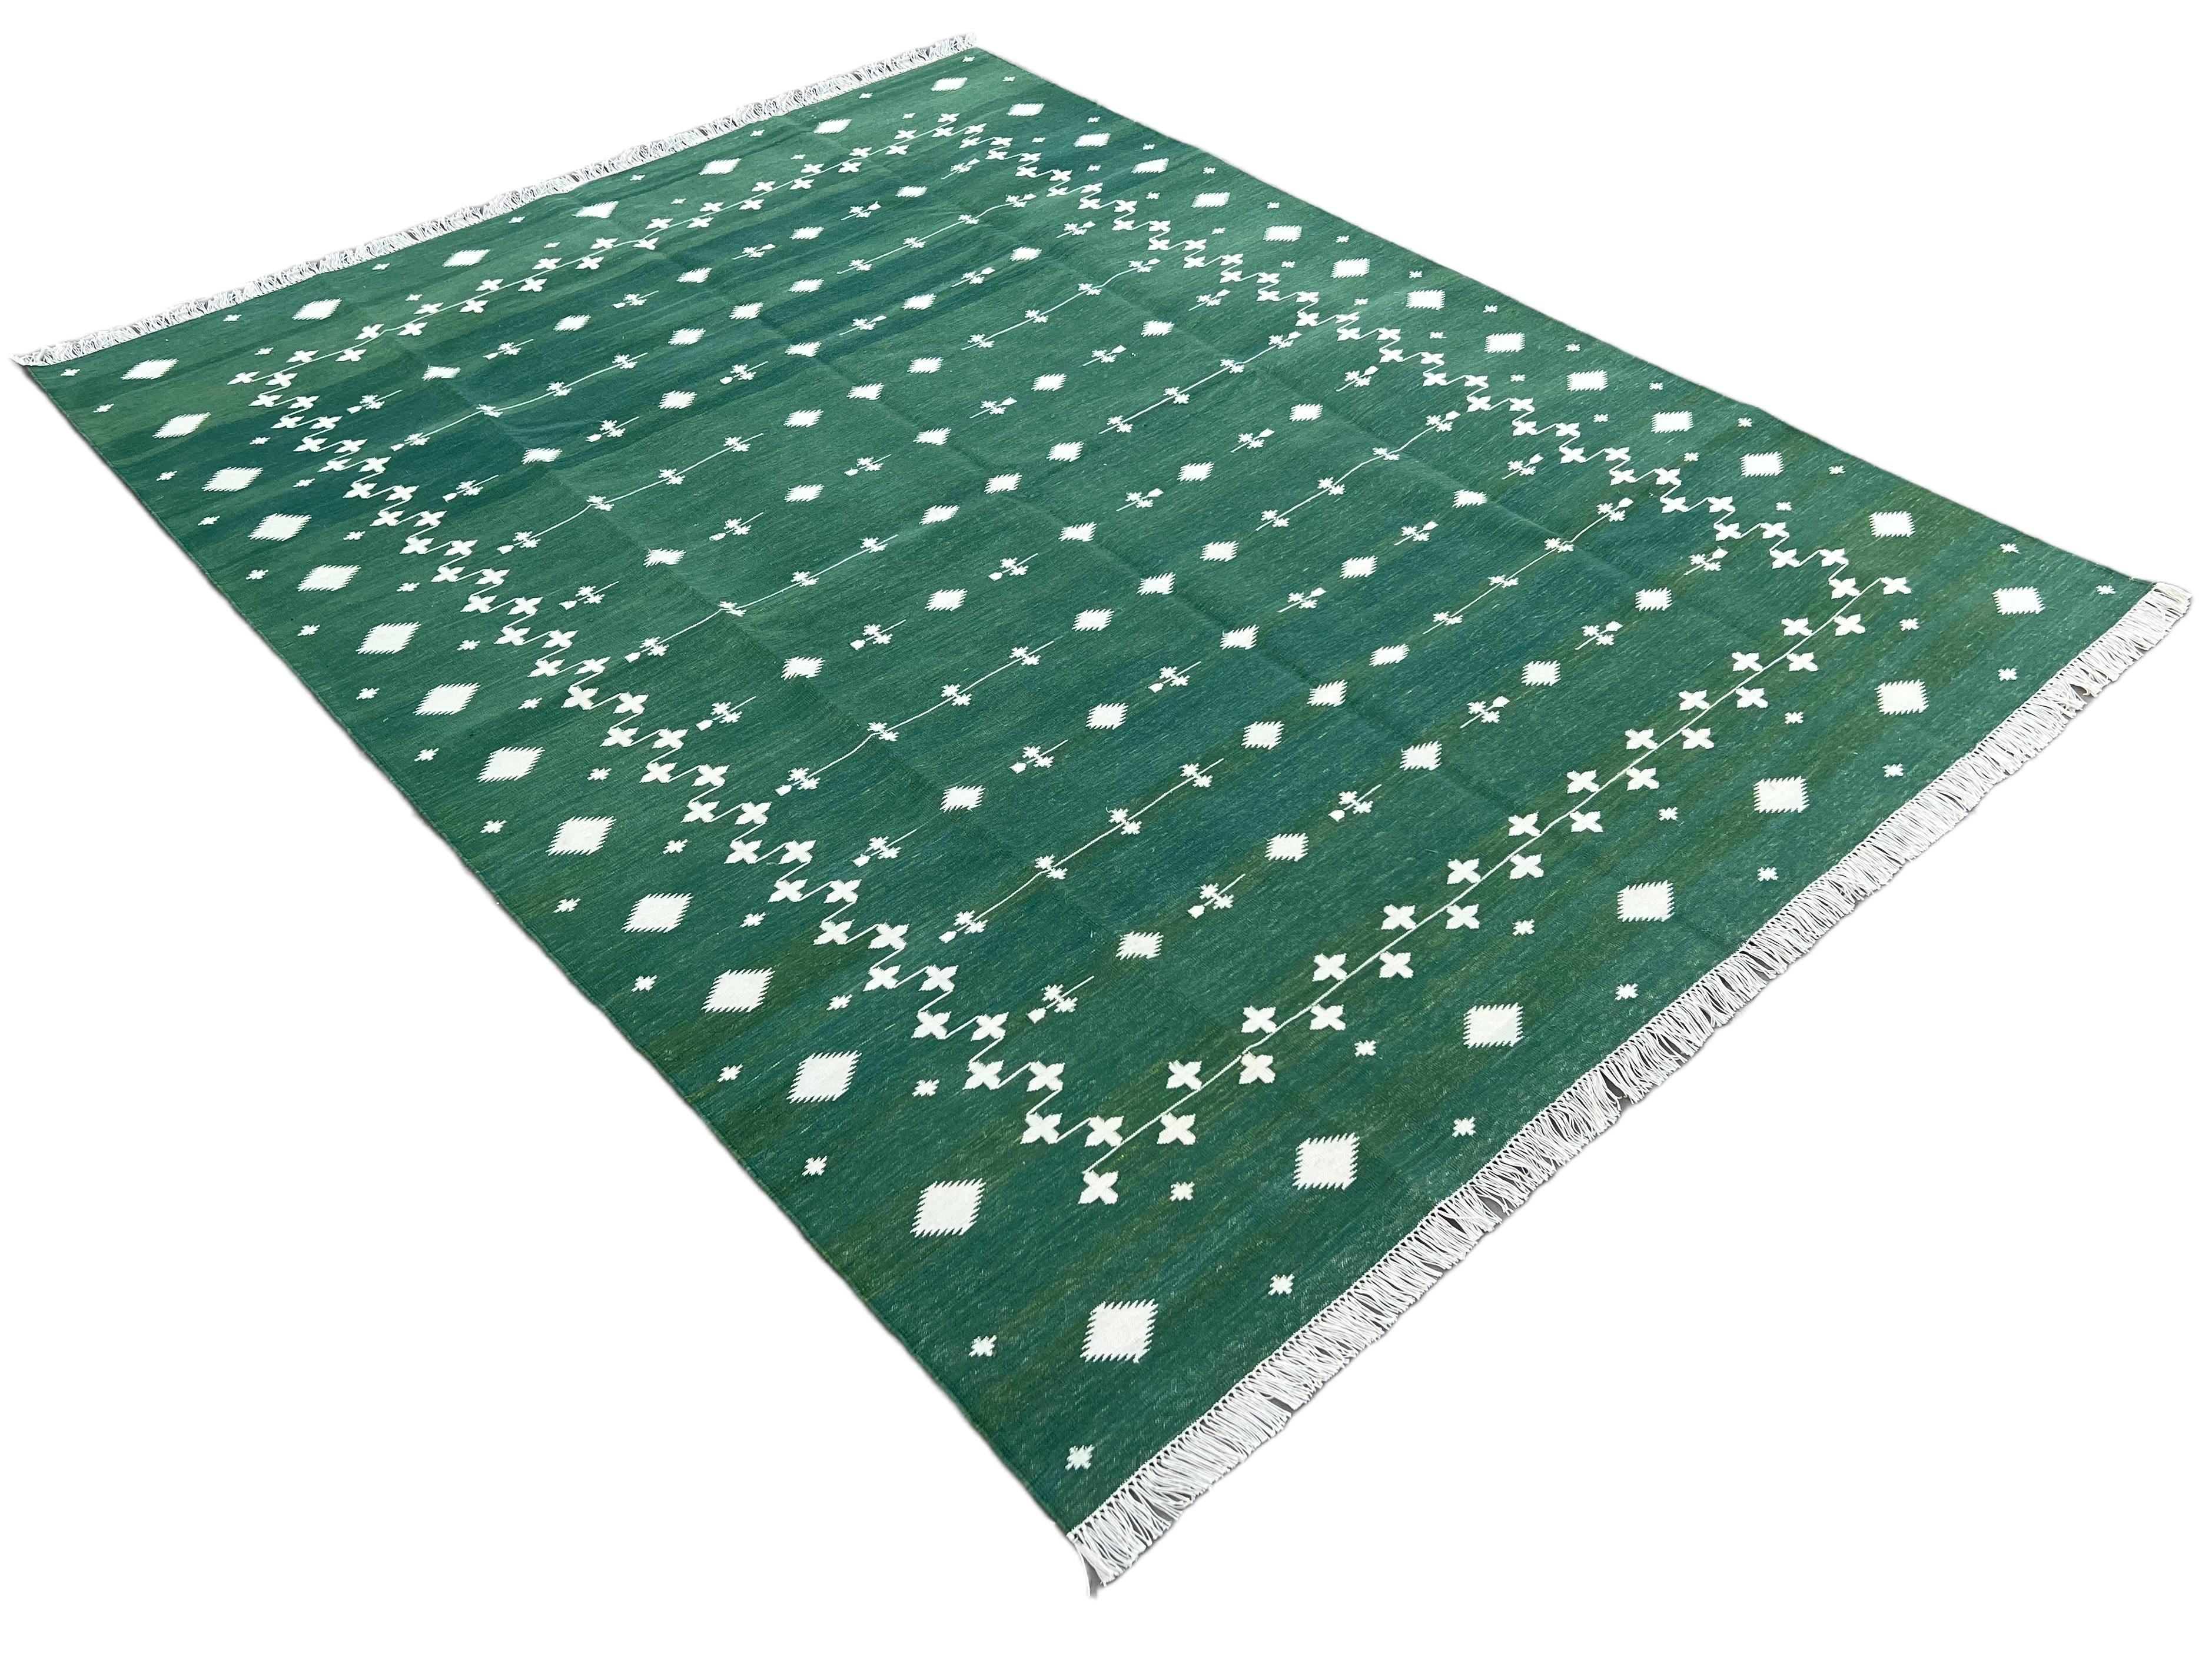 Cotton Vegetable Dyed Reversible Forest Green & White Indian Shooting Star Rug - 6'x9'
These special flat-weave dhurries are hand-woven with 15 ply 100% cotton yarn. Due to the special manufacturing techniques used to create our rugs, the size and